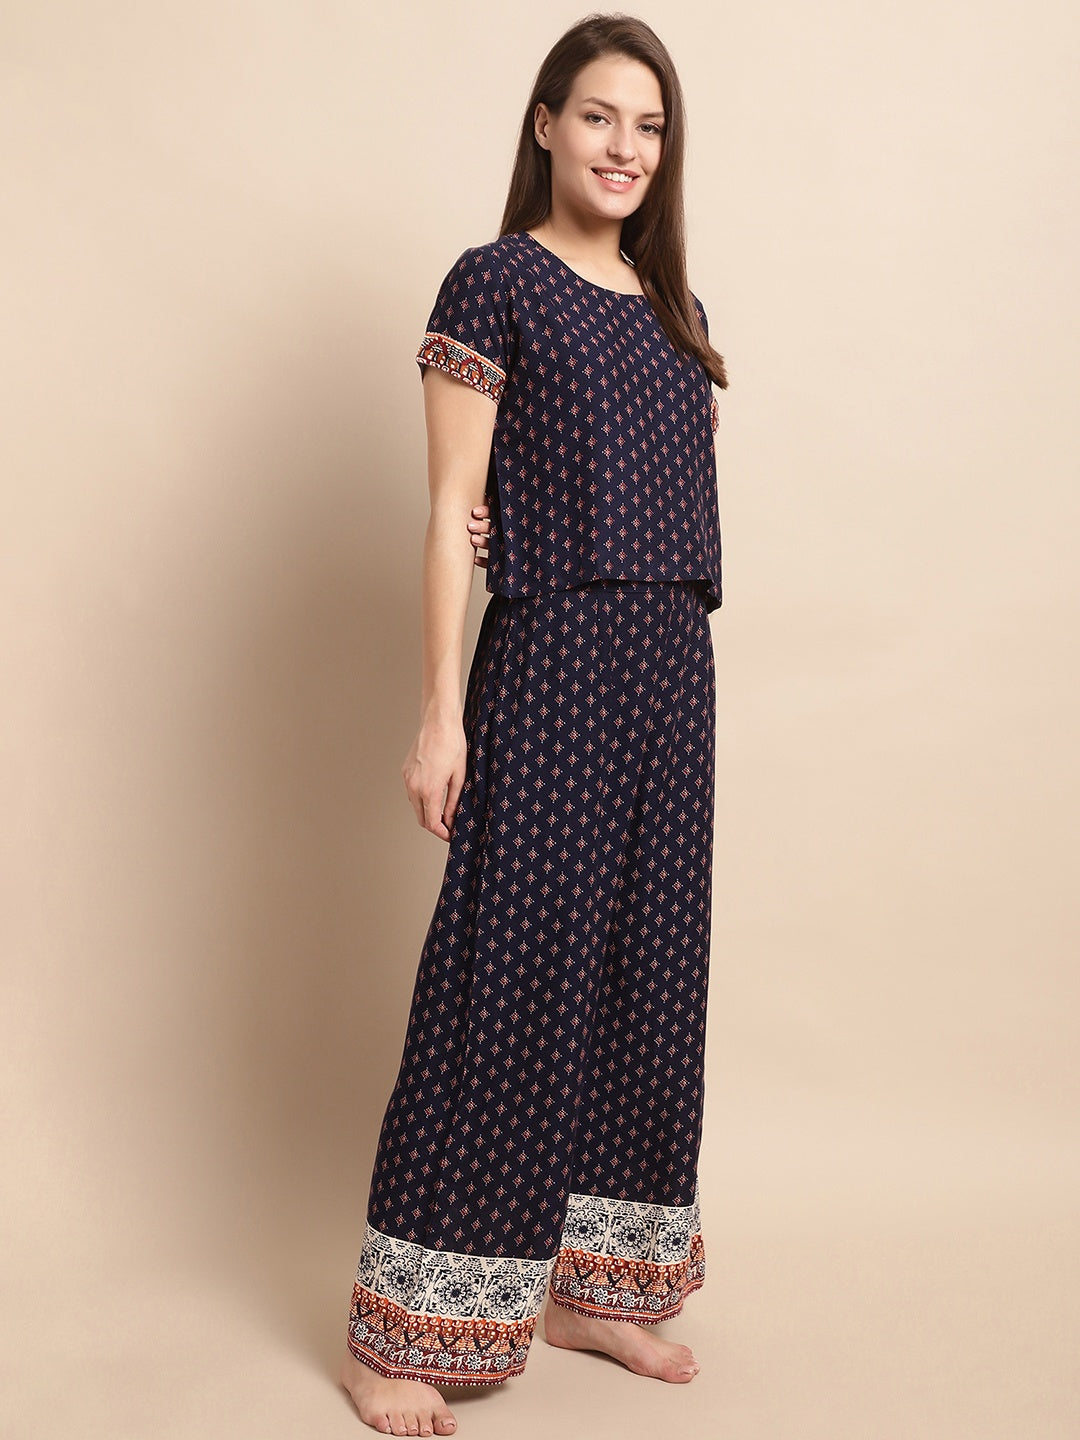 Navy Color Abstract Printed Viscose Rayon Nightsuit For Women Claura Designs Pvt. Ltd. Nightsuit Abstract, Navy Blue, Nightsuit, Rayon, Sleepwear